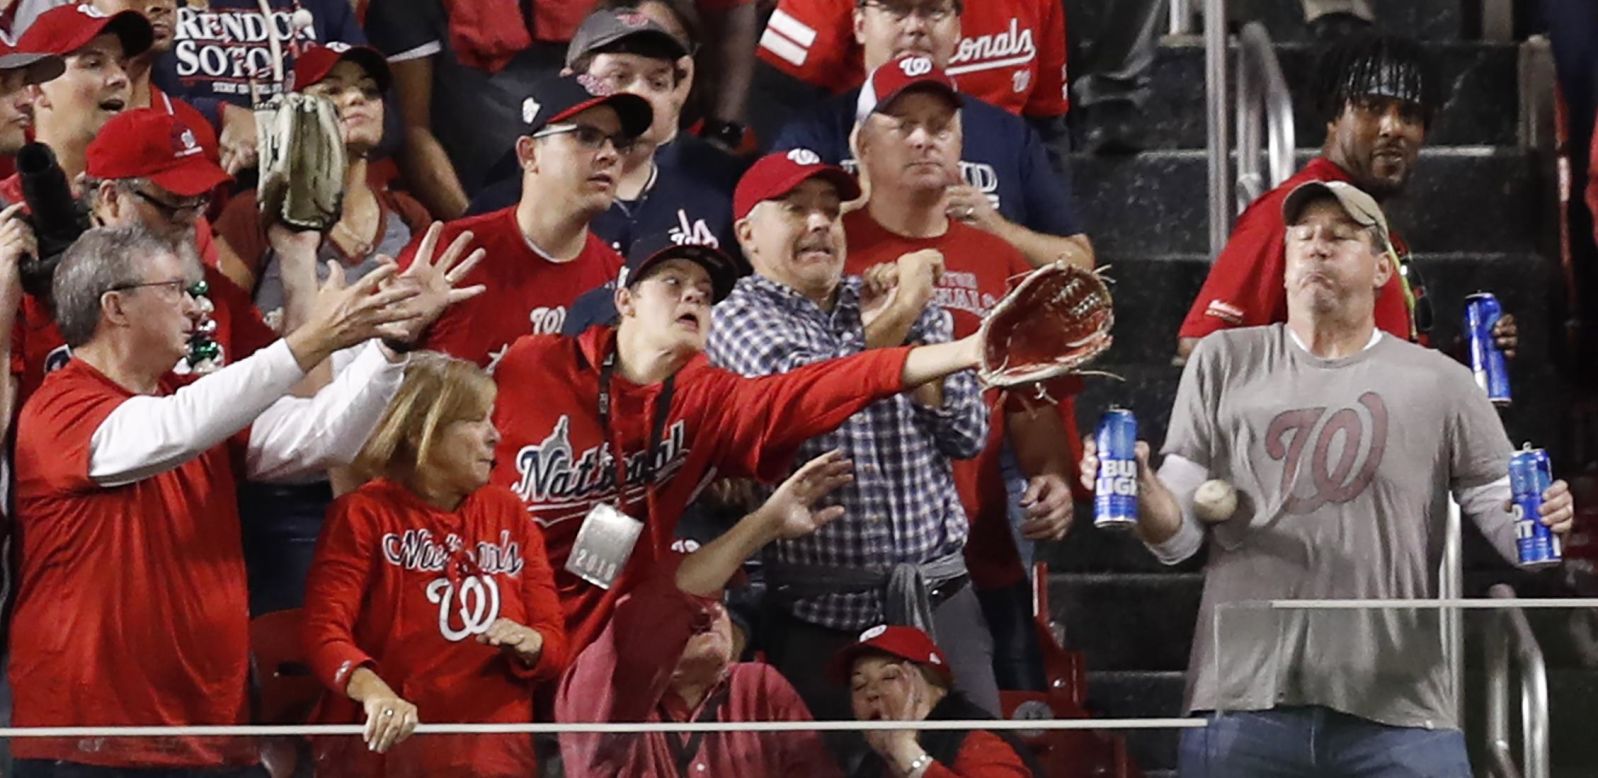 A Washington Nationals fan holding two beers gets hit from a homer by Houston Astros Yordan Alvarez during Game 5 of the World Series at Nationals Park in Washington, D.C., on Sunday, October 27. <a href="https://www.cnn.com/2019/10/30/sport/gallery/world-series-2019/index.html" target="_blank">See more photos from the World Series</a><br />